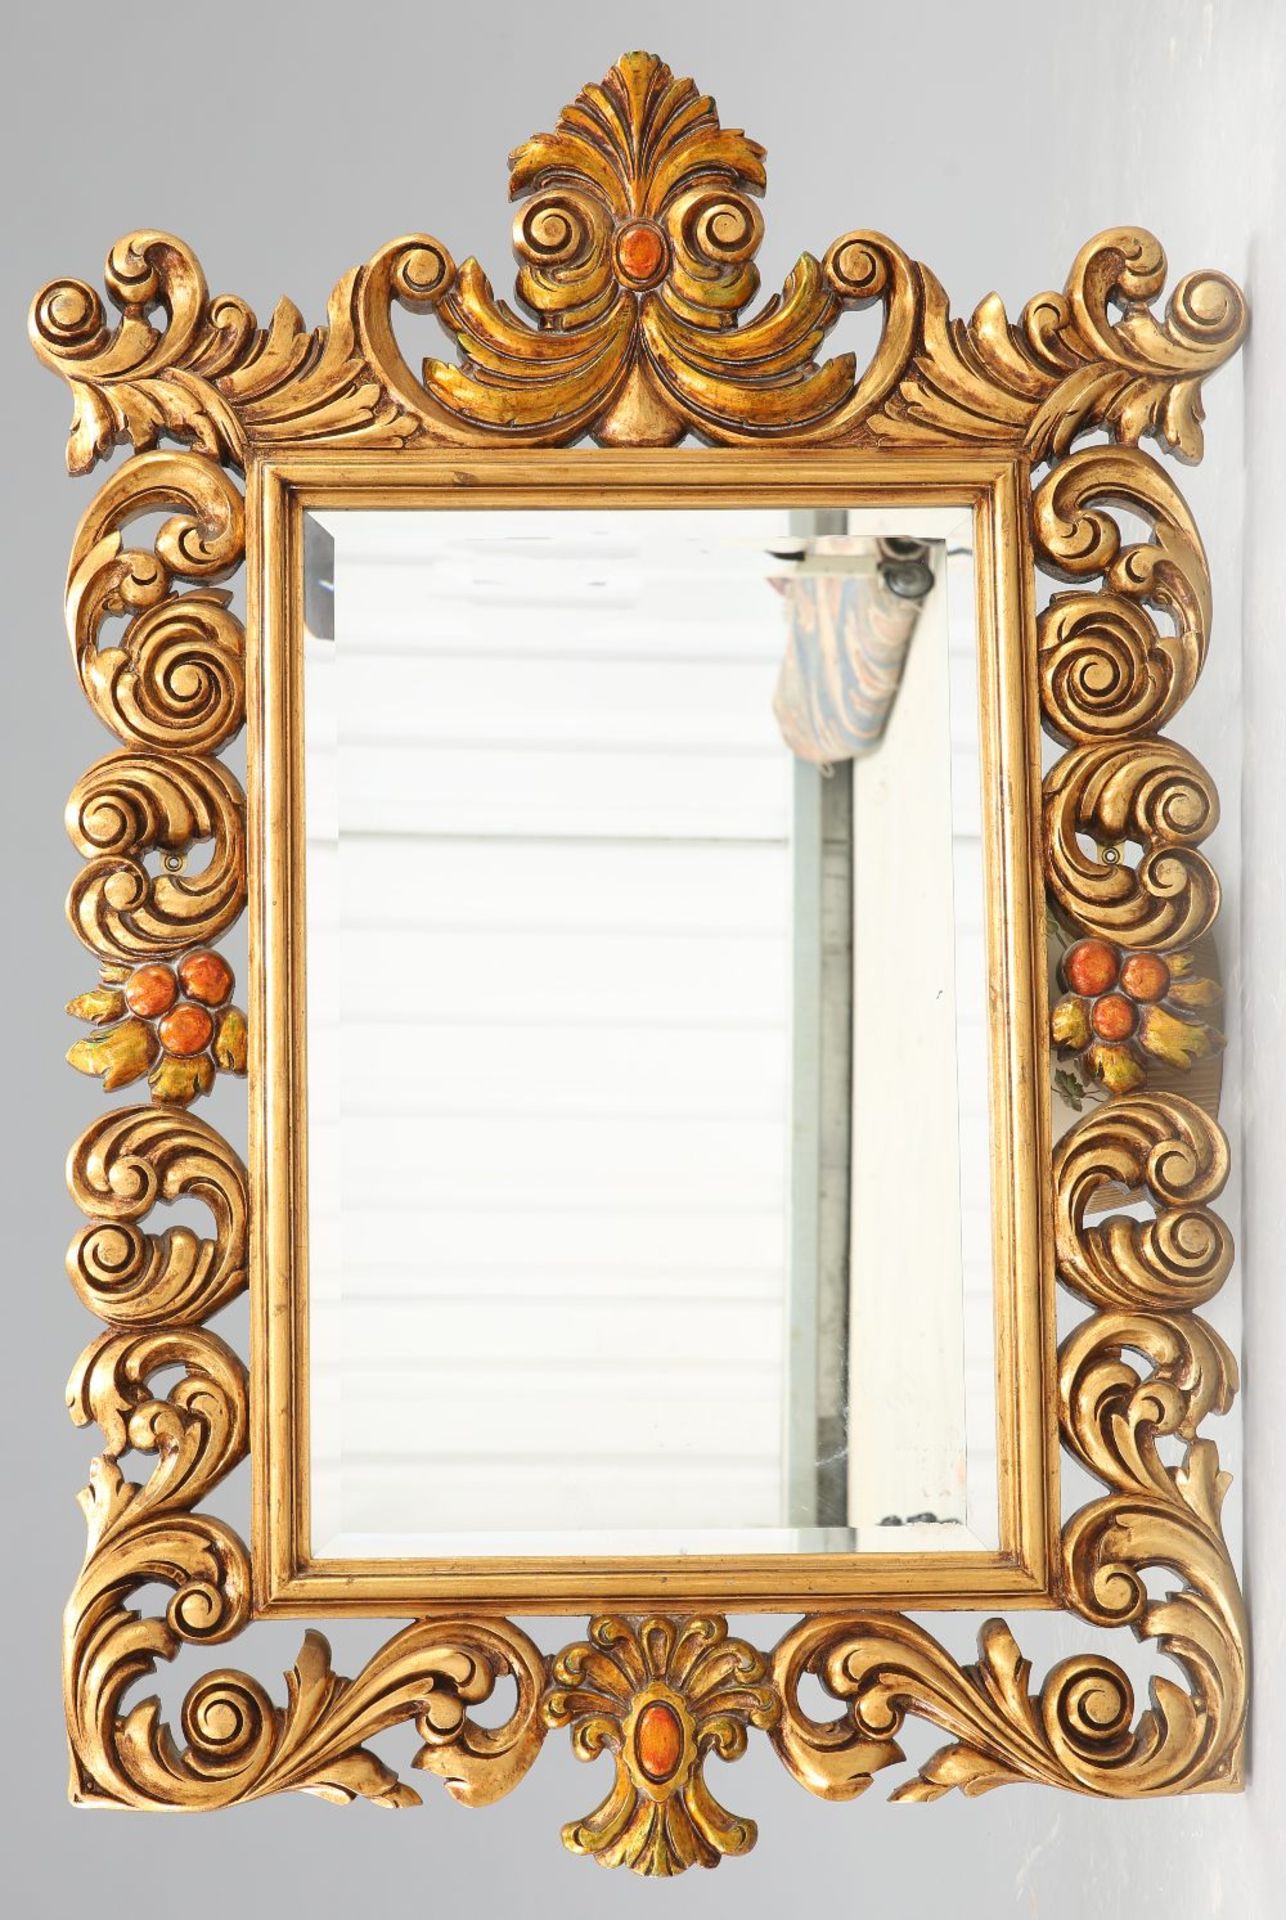 A LARGE BAROQUE STYLE GILT COMPOSITION MIRROR